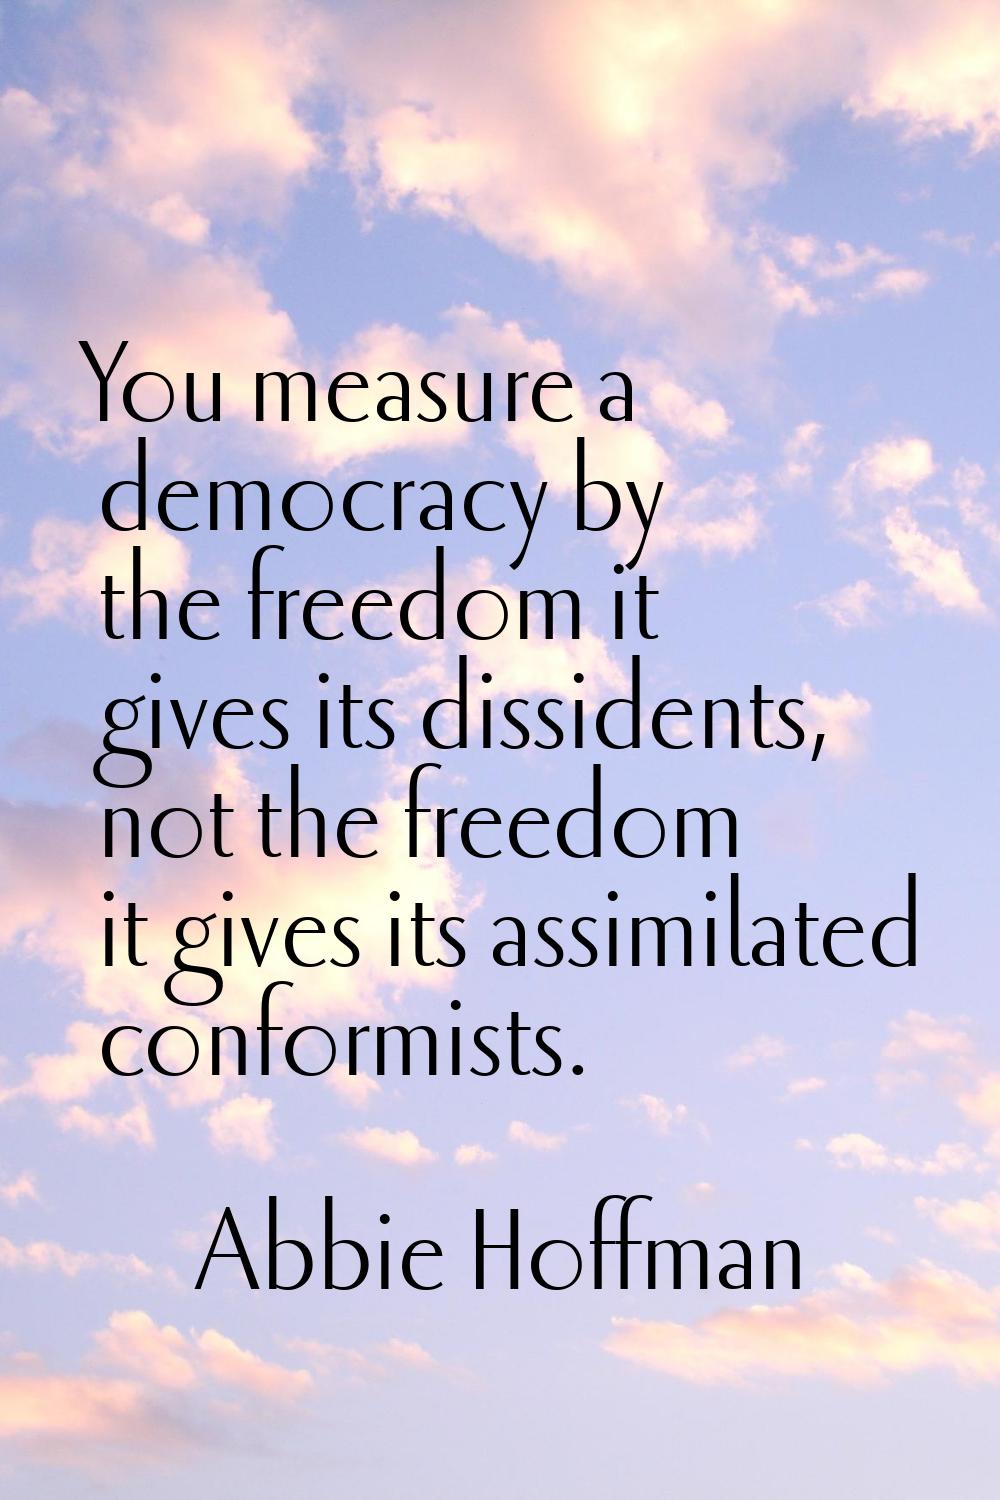 You measure a democracy by the freedom it gives its dissidents, not the freedom it gives its assimi